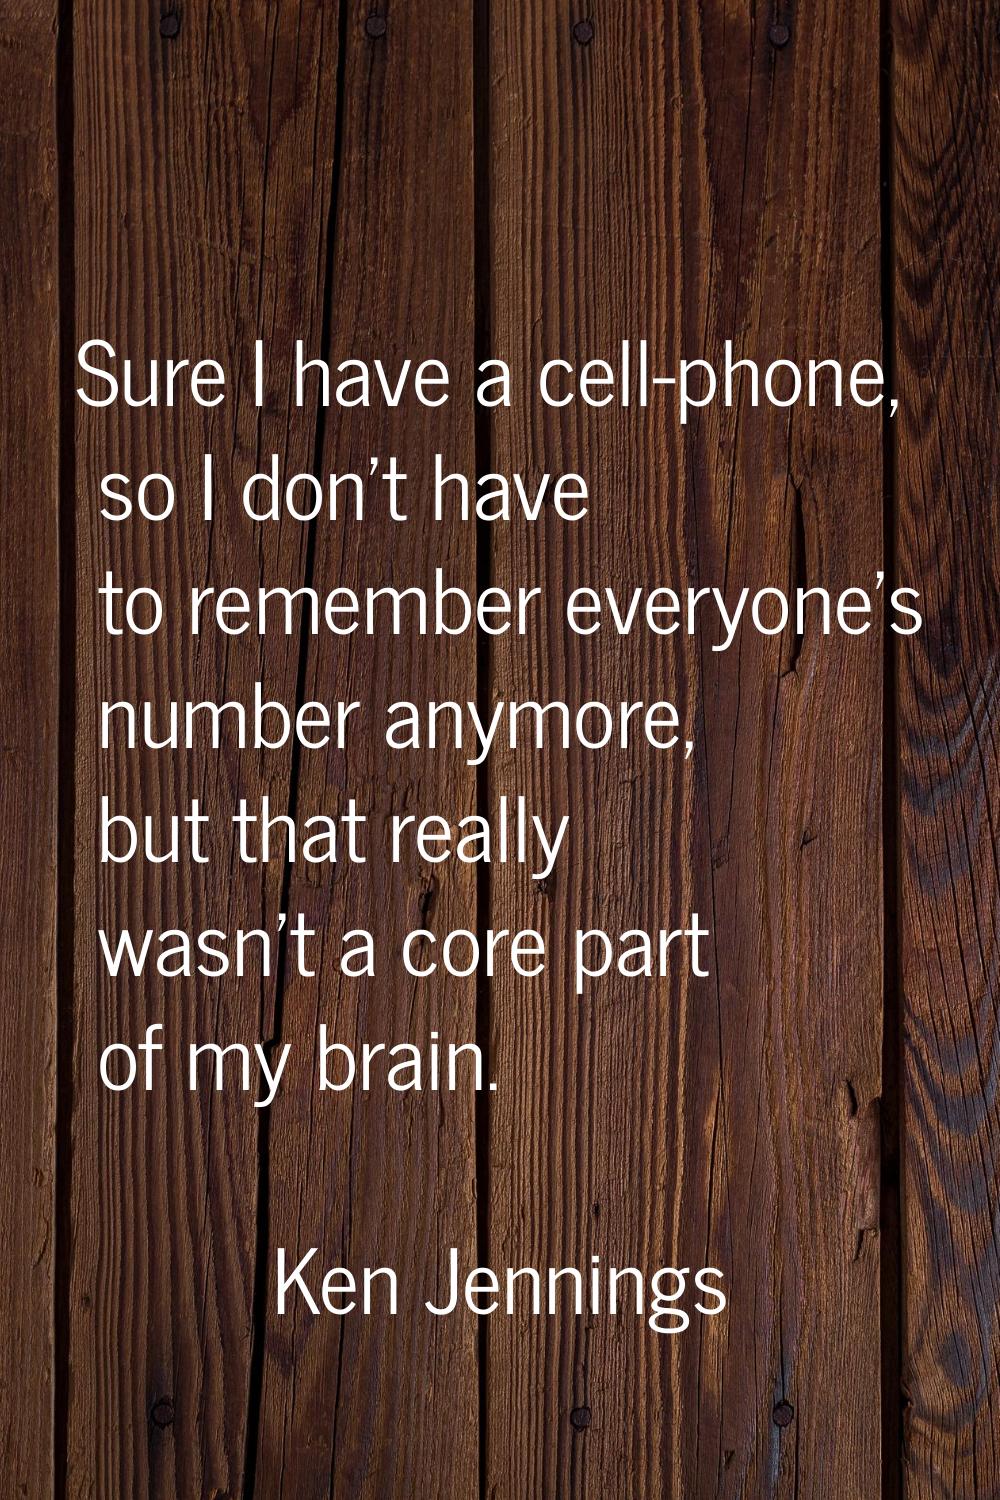 Sure I have a cell-phone, so I don't have to remember everyone's number anymore, but that really wa